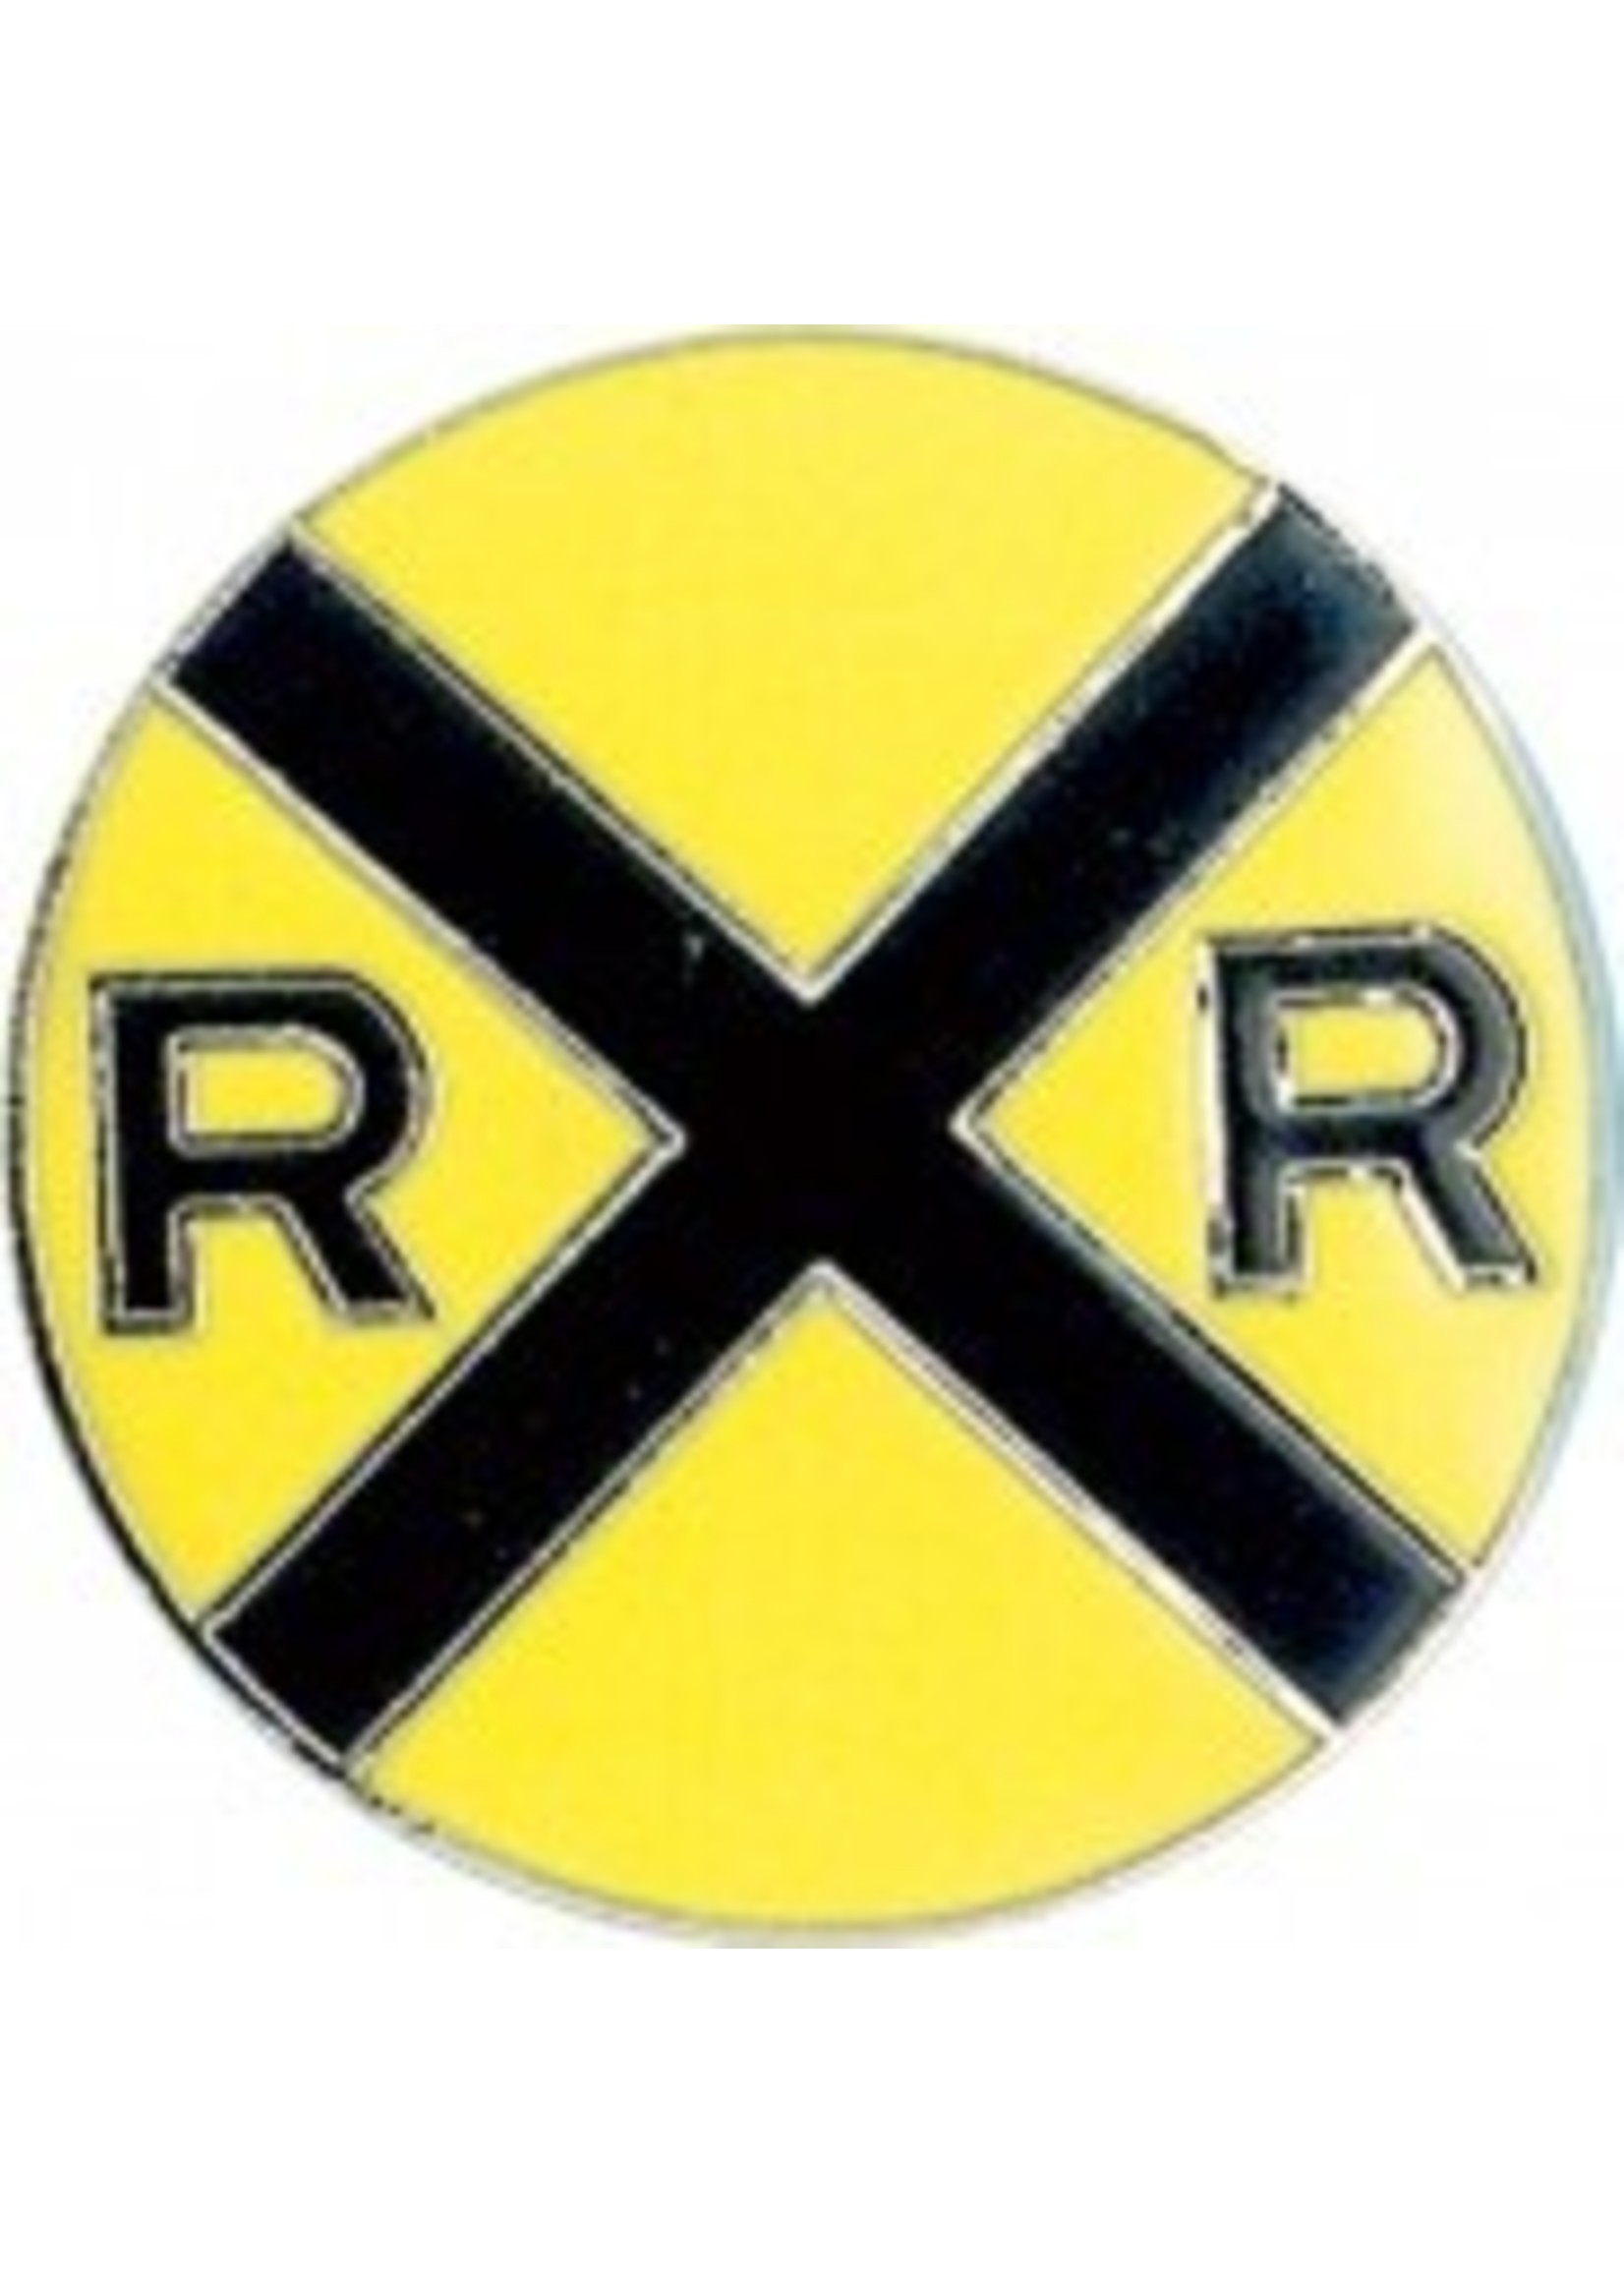 RR Crossing Large Round Hat Tack (pin)